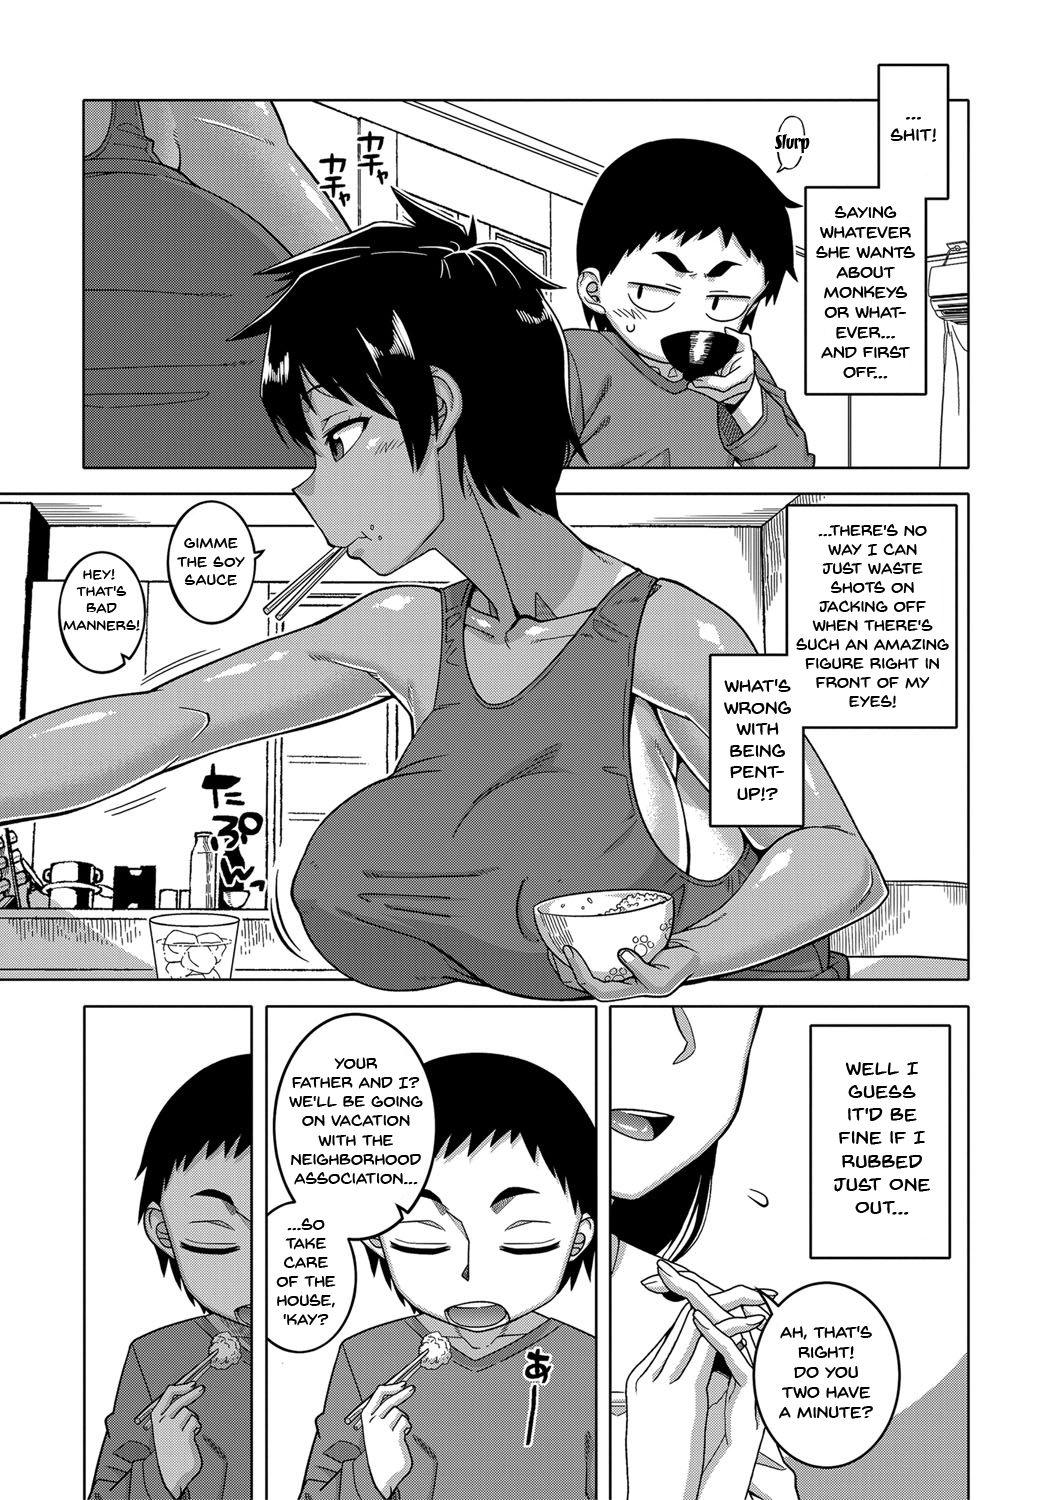 Gay Boy Porn Chotto Bijin de Mune ga Dekakute Eroi dake no Baka Nee | My Stupid Older Sister Who's Just a Bit Hot Because Of Her Large Breasts Ch. 2 Curves - Page 5